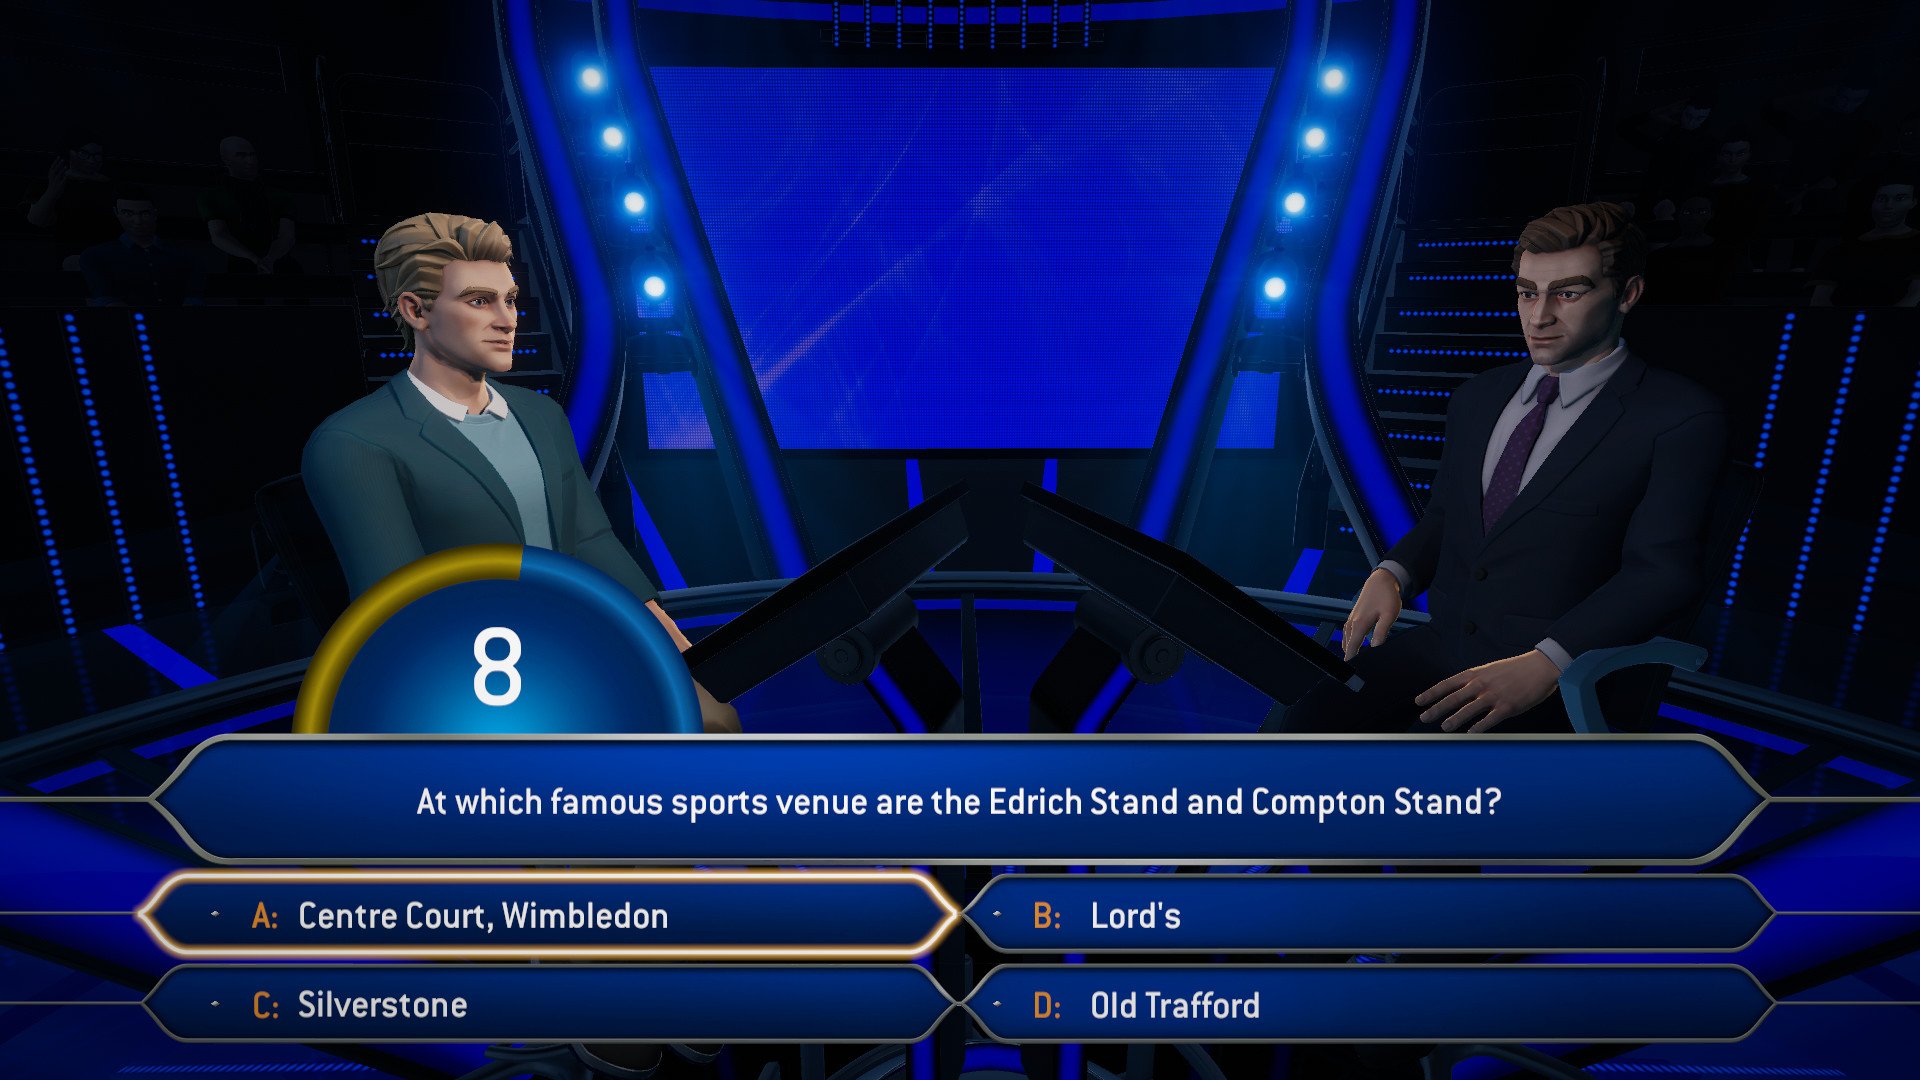 Who Wants To Be A Millionaire 1